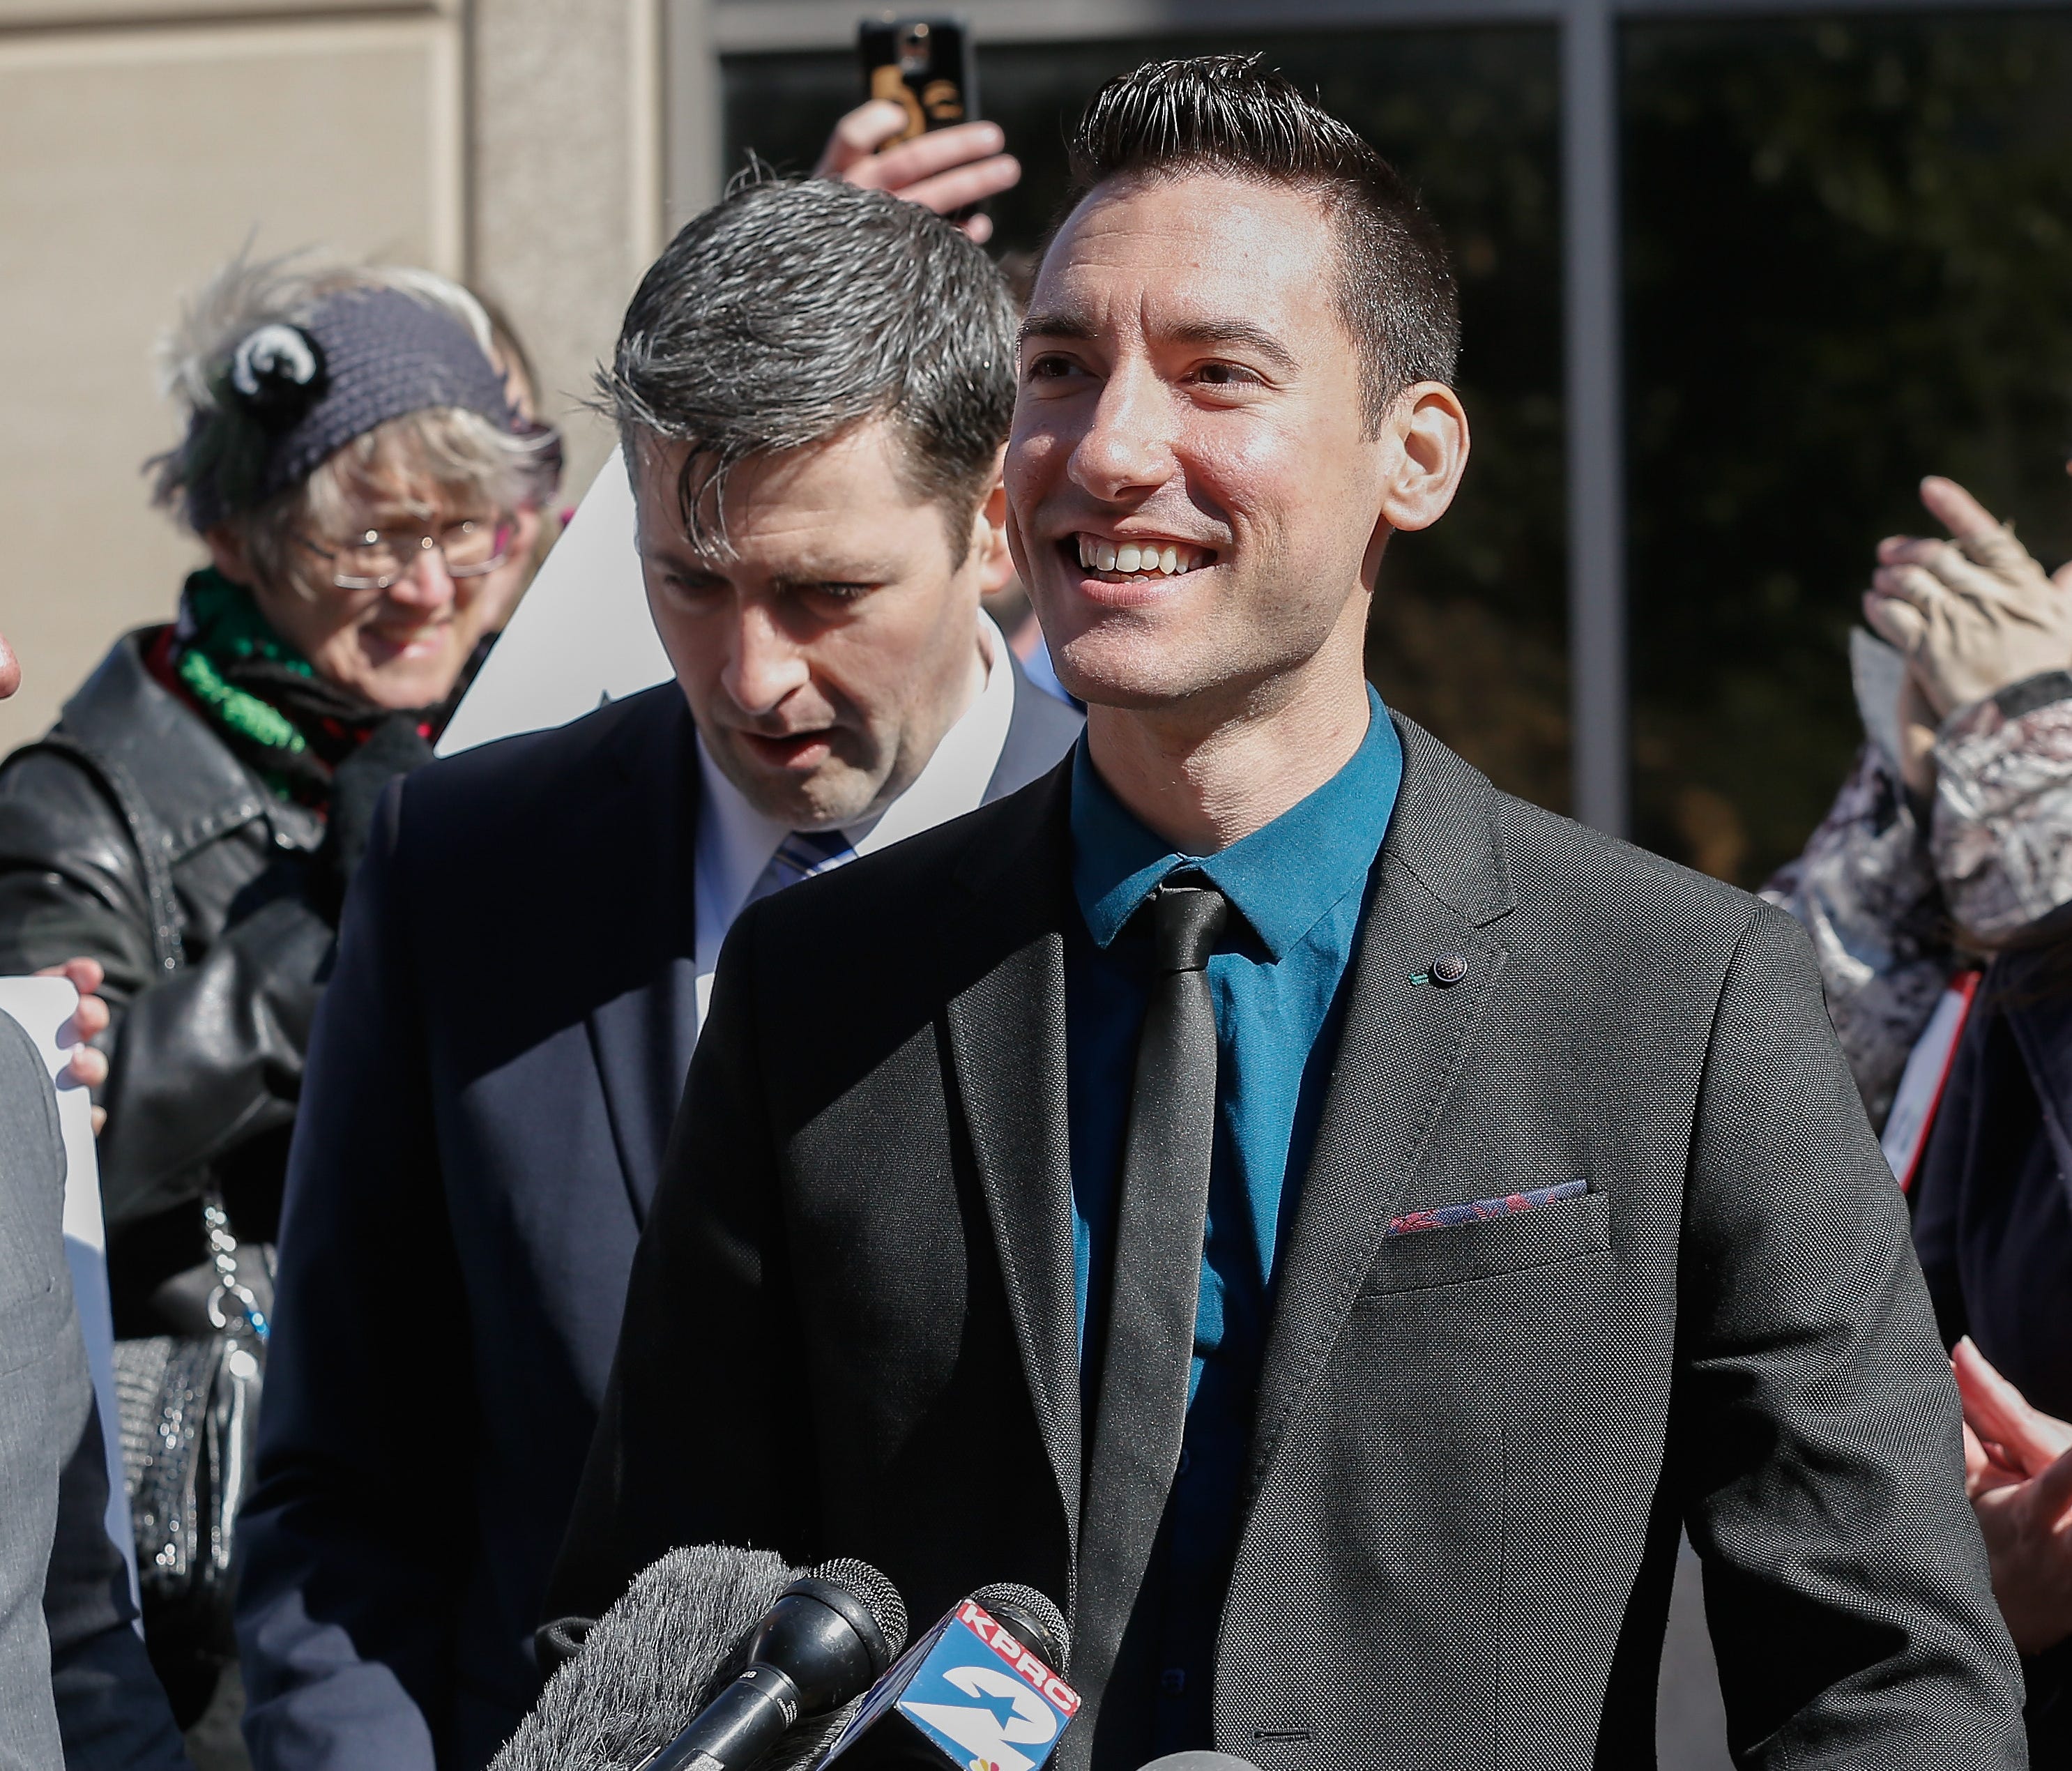 David Daleiden, one of the two anti-abortion activists charged with invading the privacy of medical providers by filming without consent.